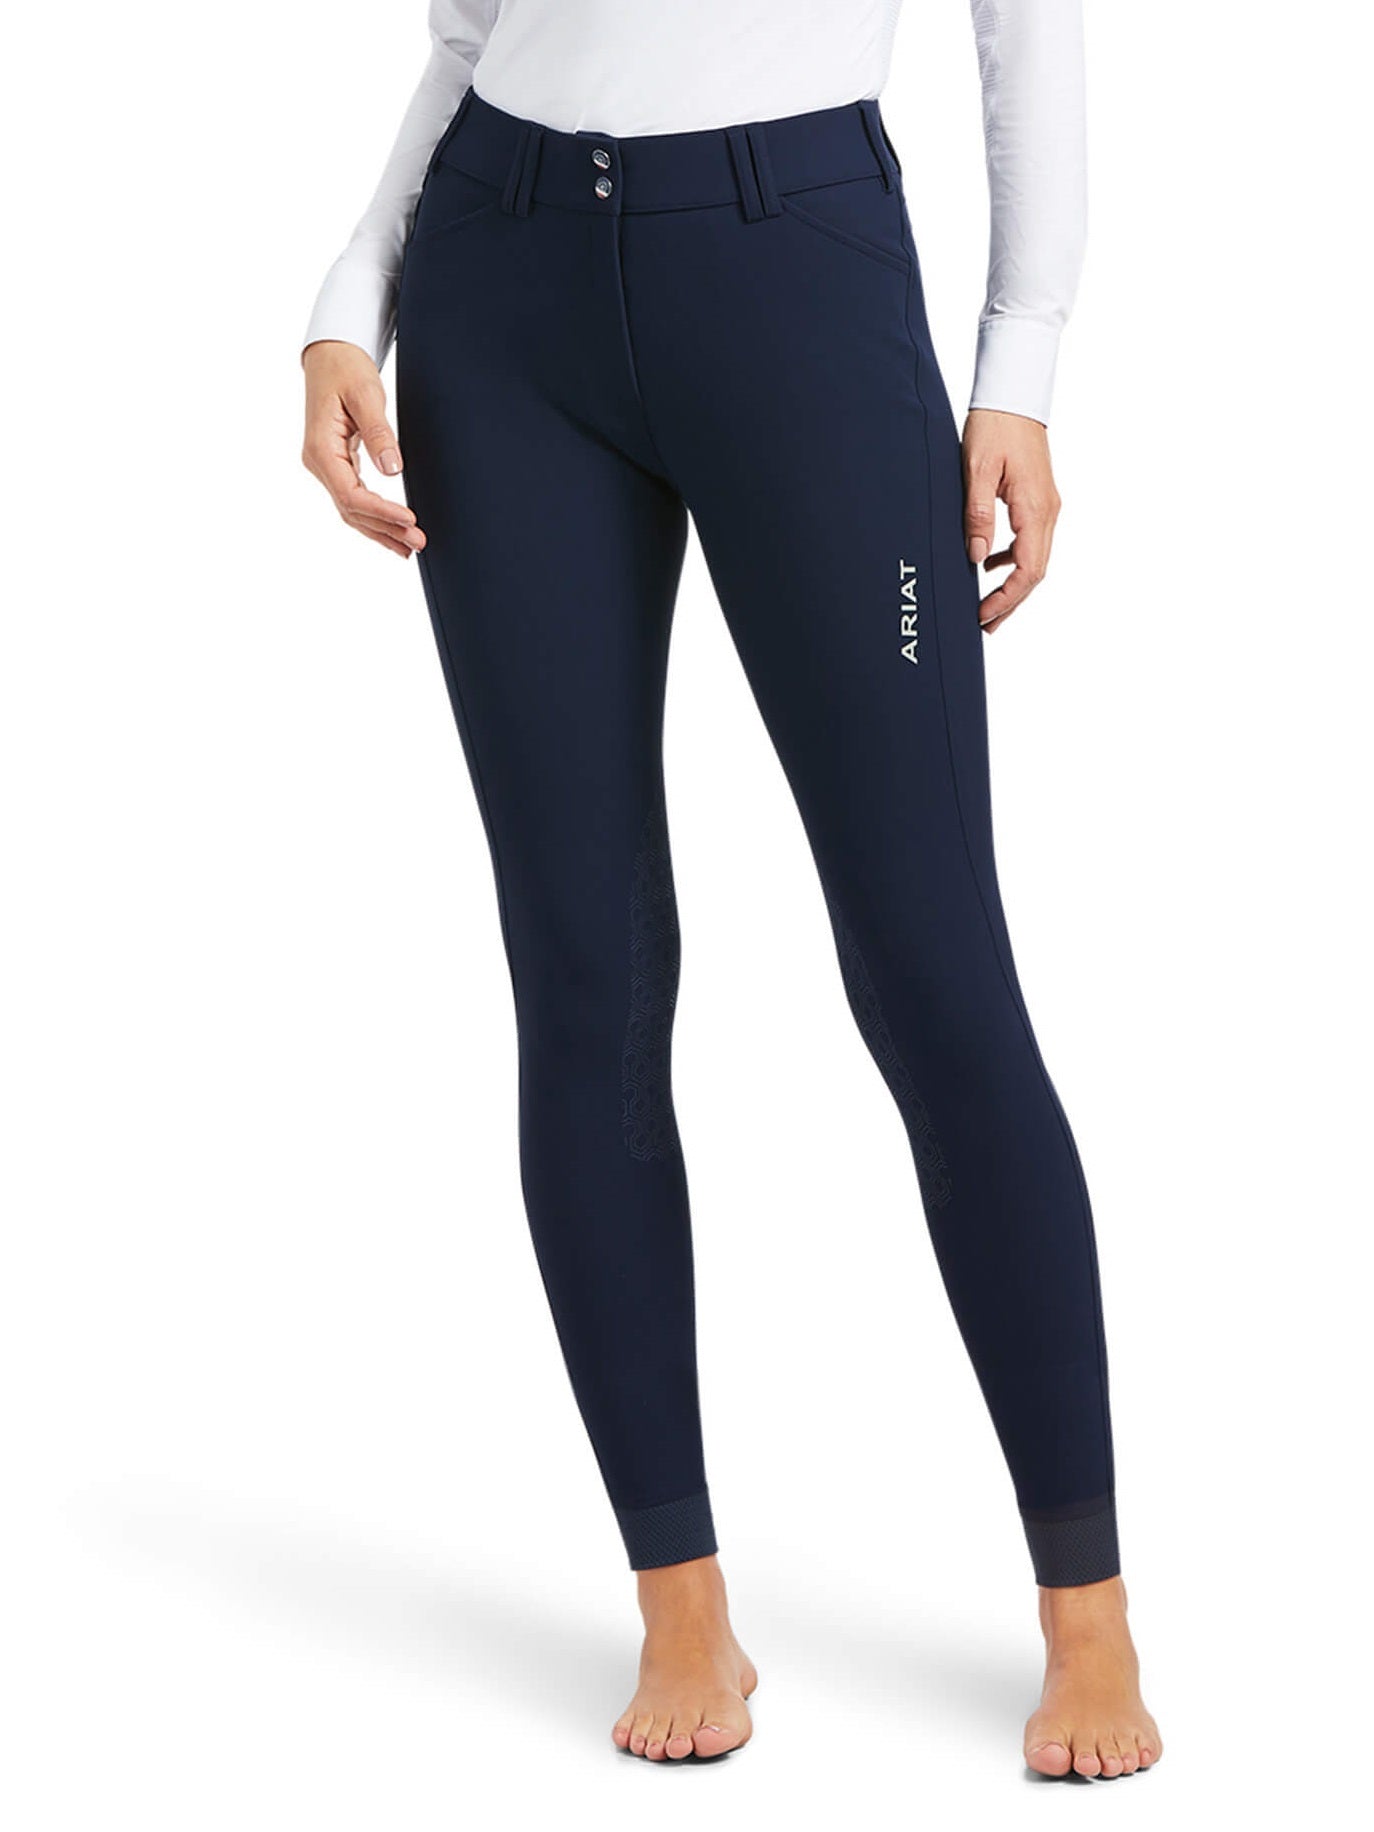 60% OFF - ARIAT Tri Factor Knee Patch Breeches - Womens -  Navy - Size: 34